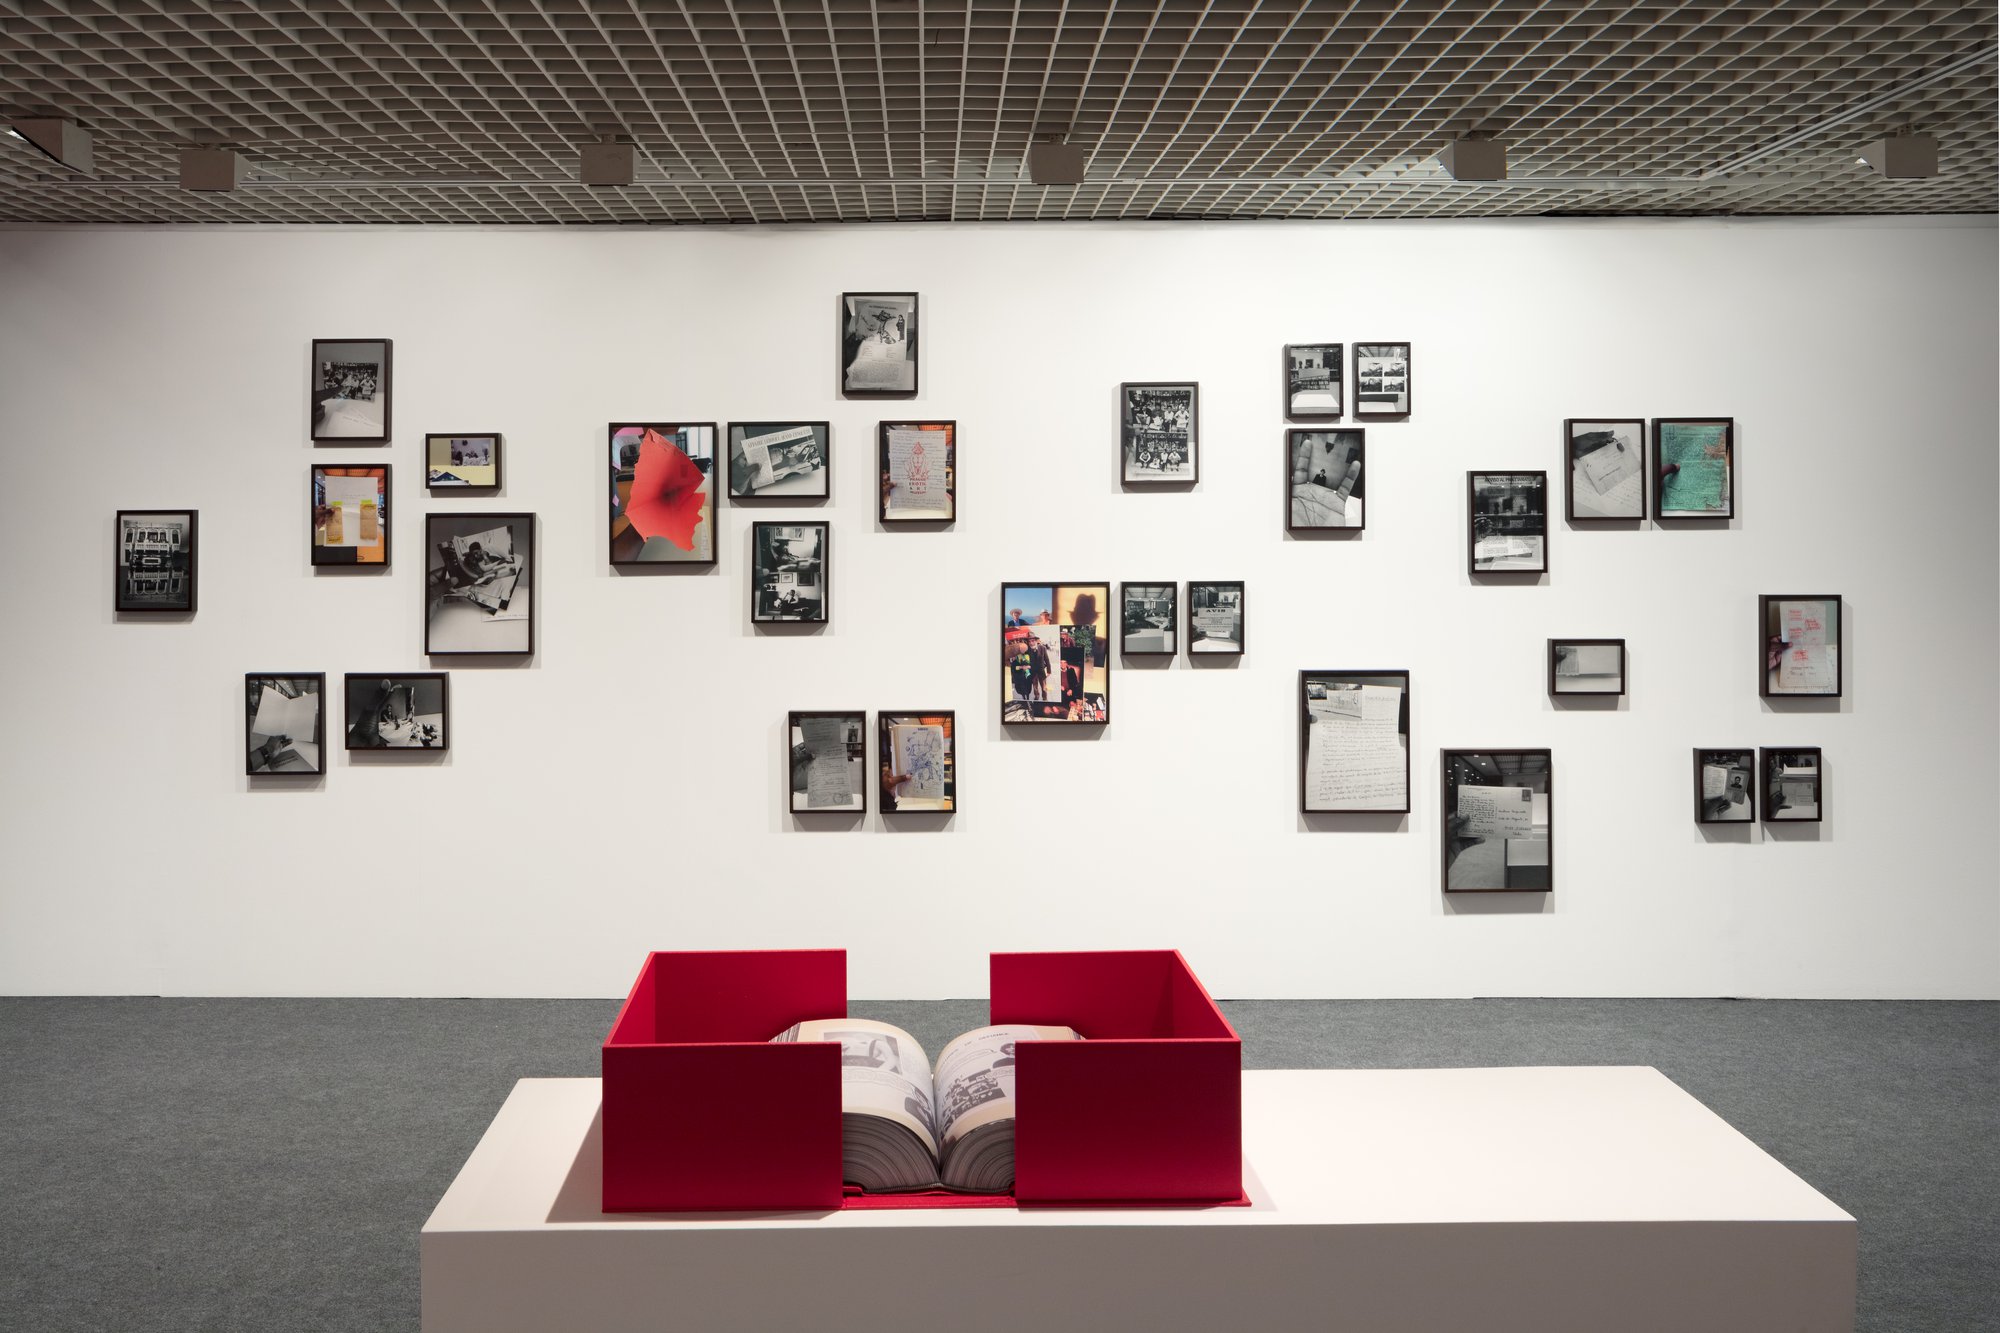 Views of the exhibition Fracture Empire by Samson Kambalu at Culturgest, Lisbon. Photos by António Jorge Silva.